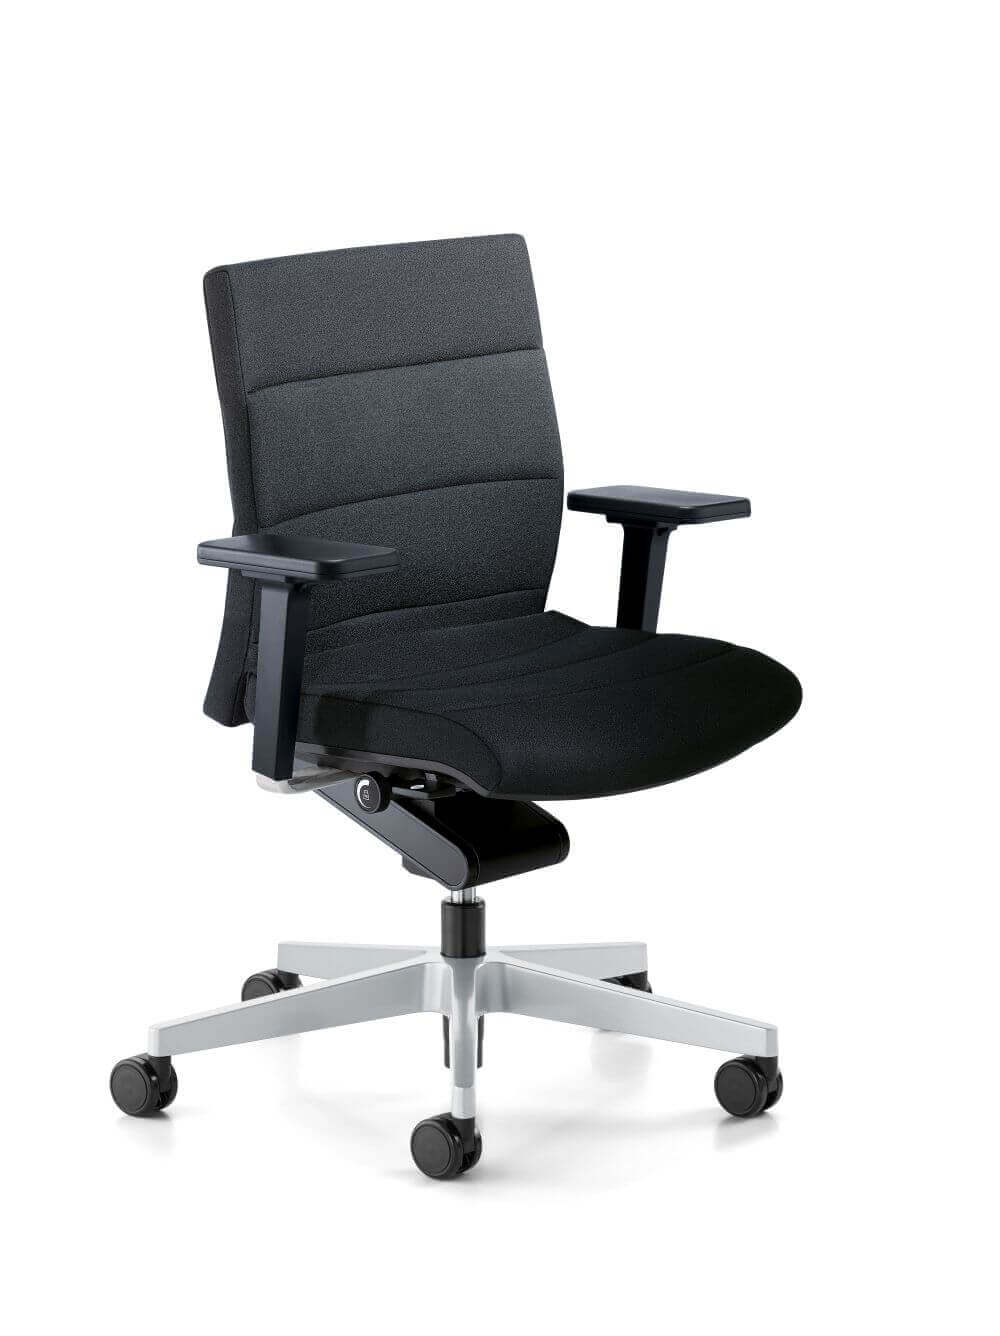 ch1 The most comfortable chair that you can get for your back